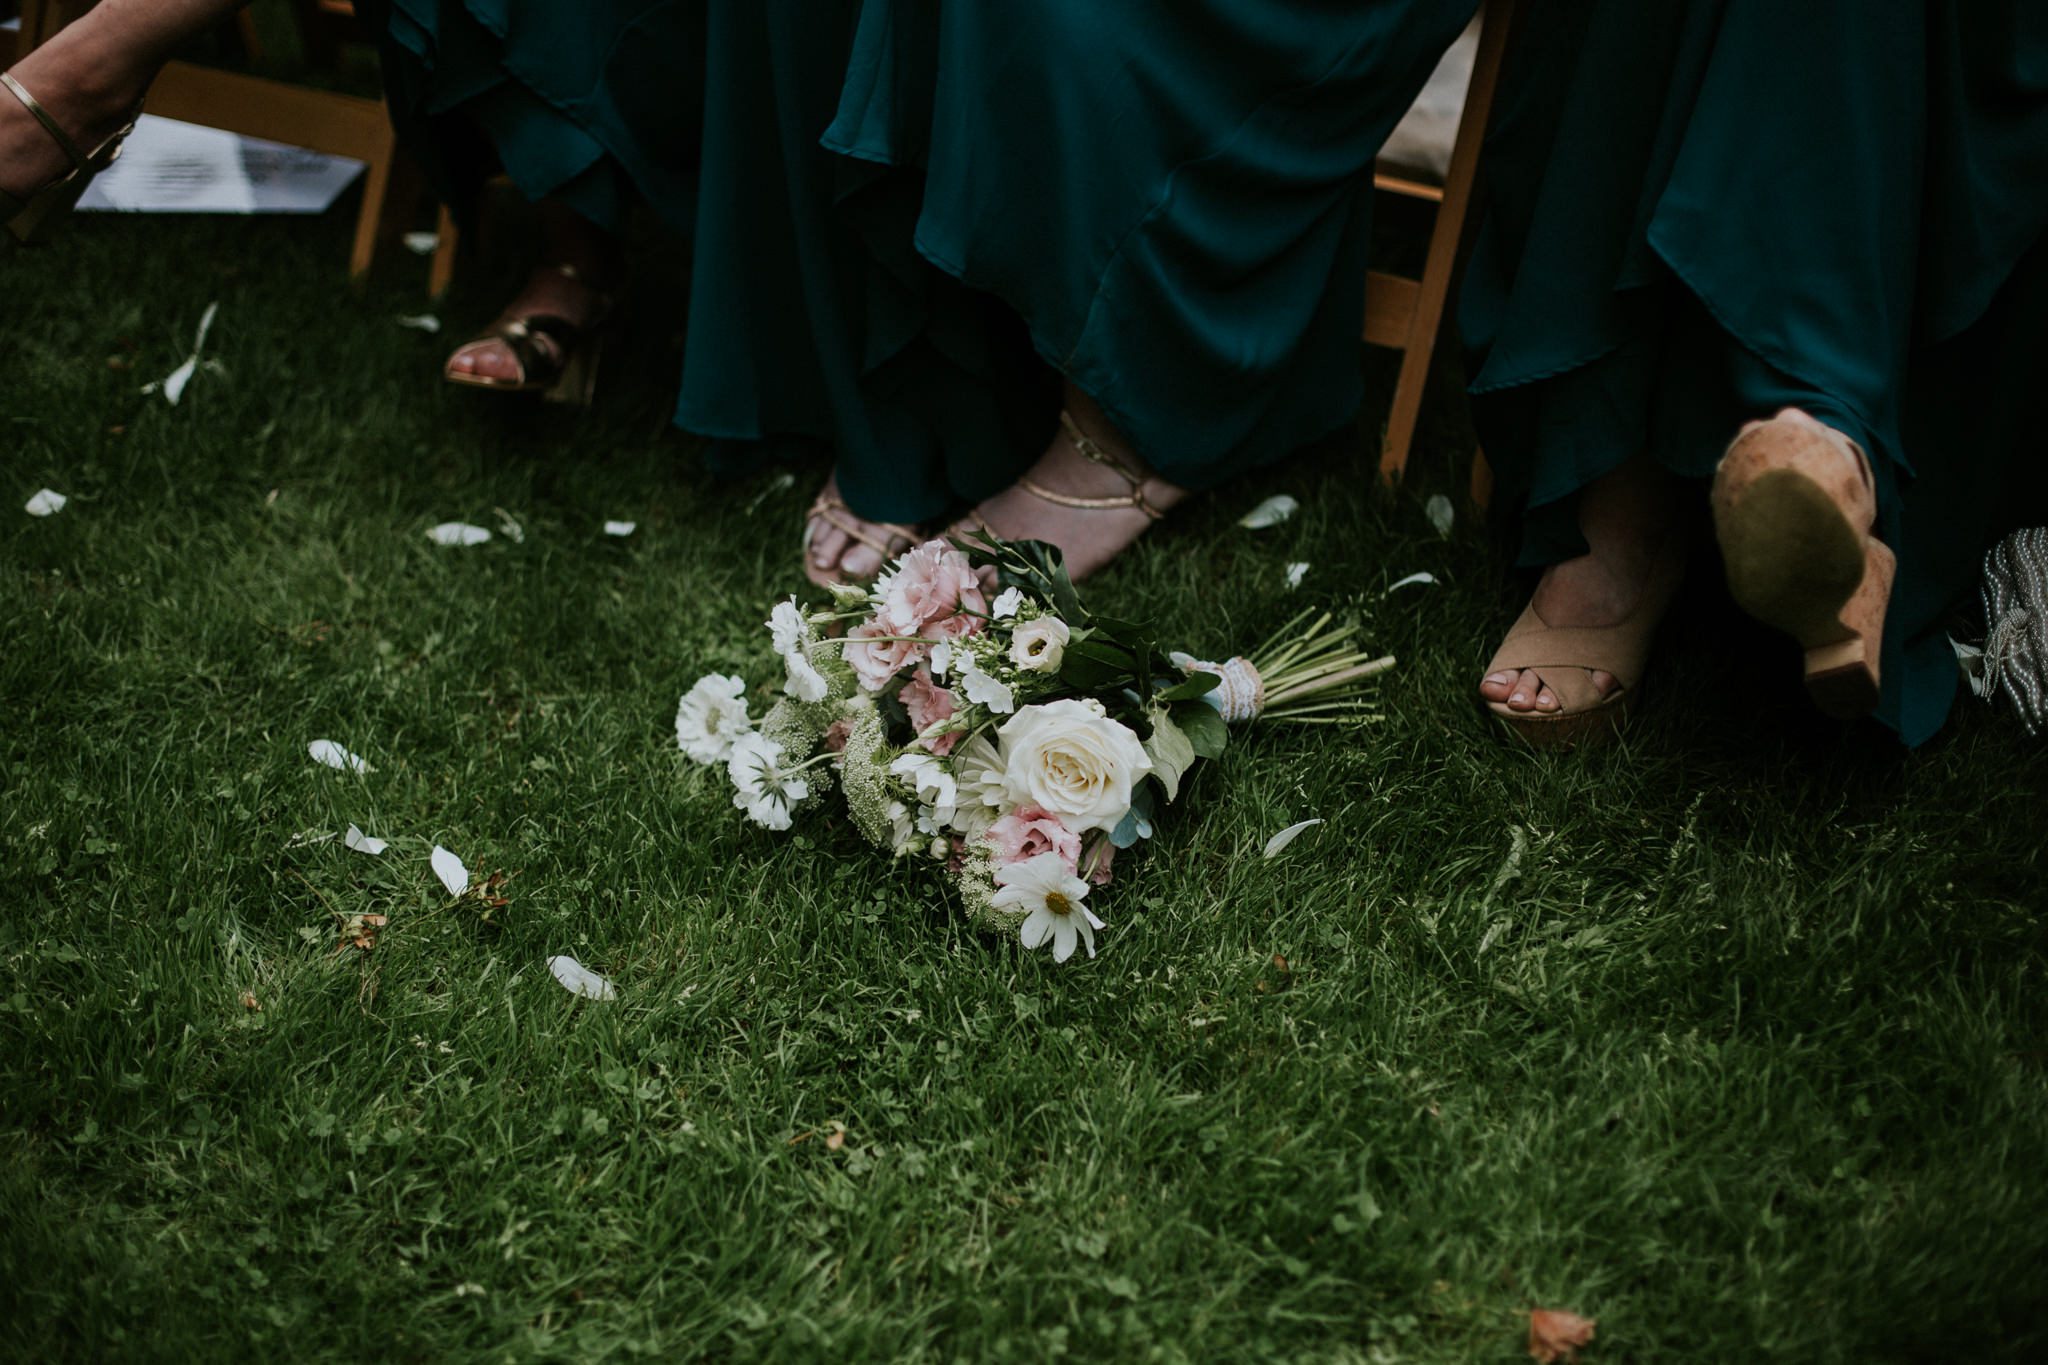 A bridesmaid's bouquet lies on the floor at a wedding